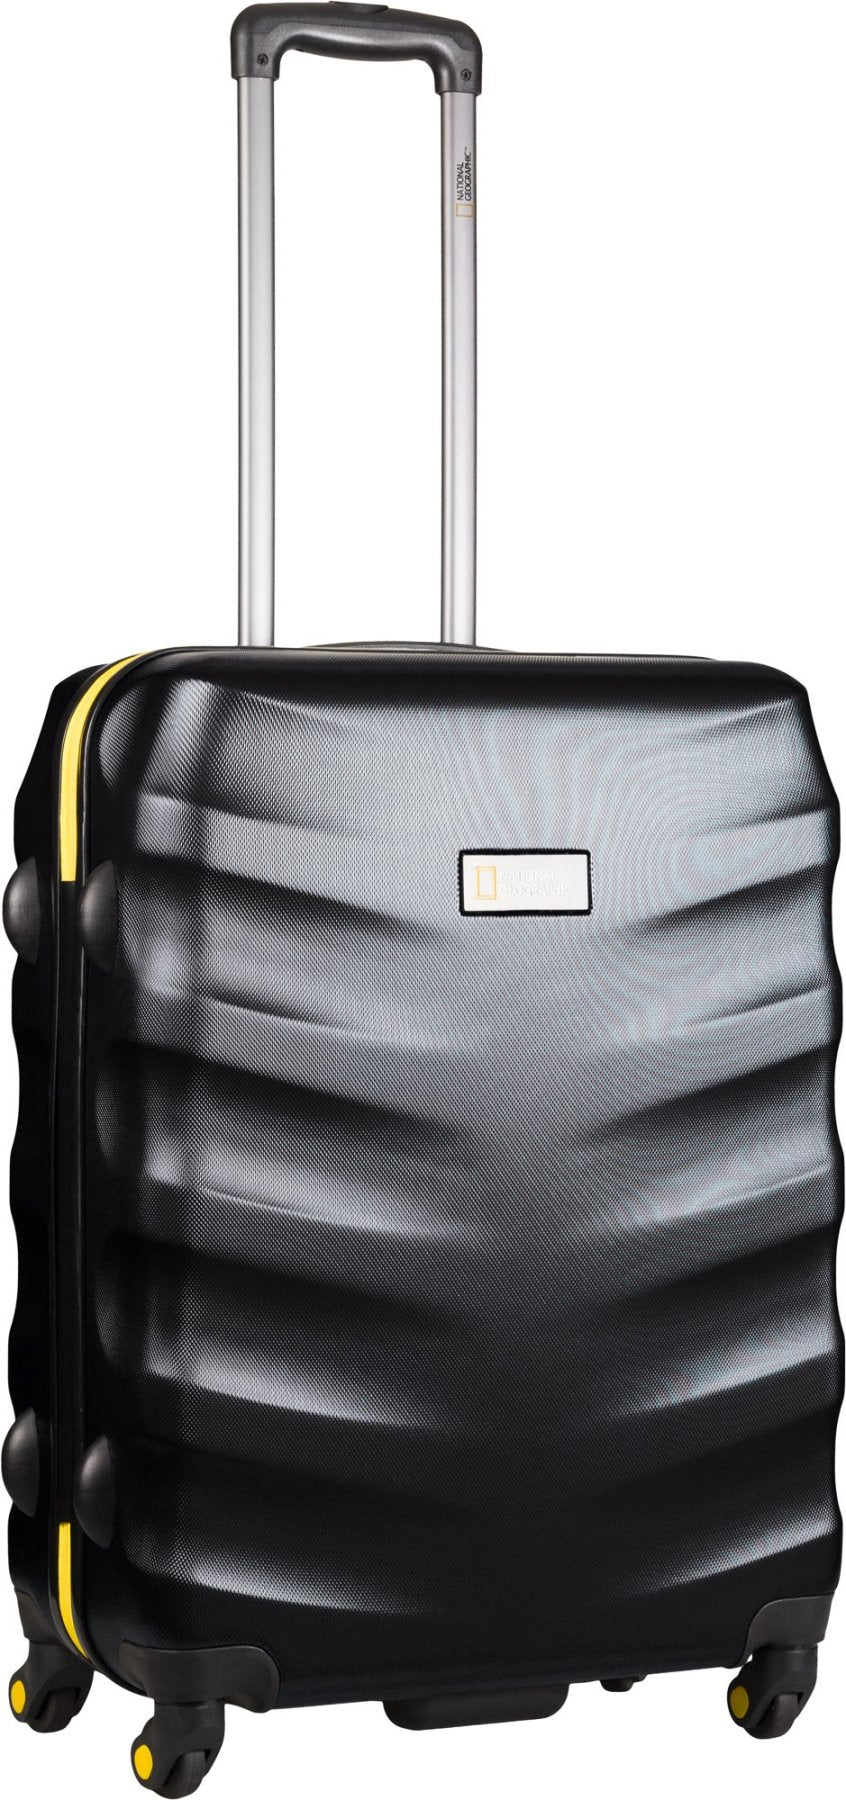 tough suitcases at low prices online 